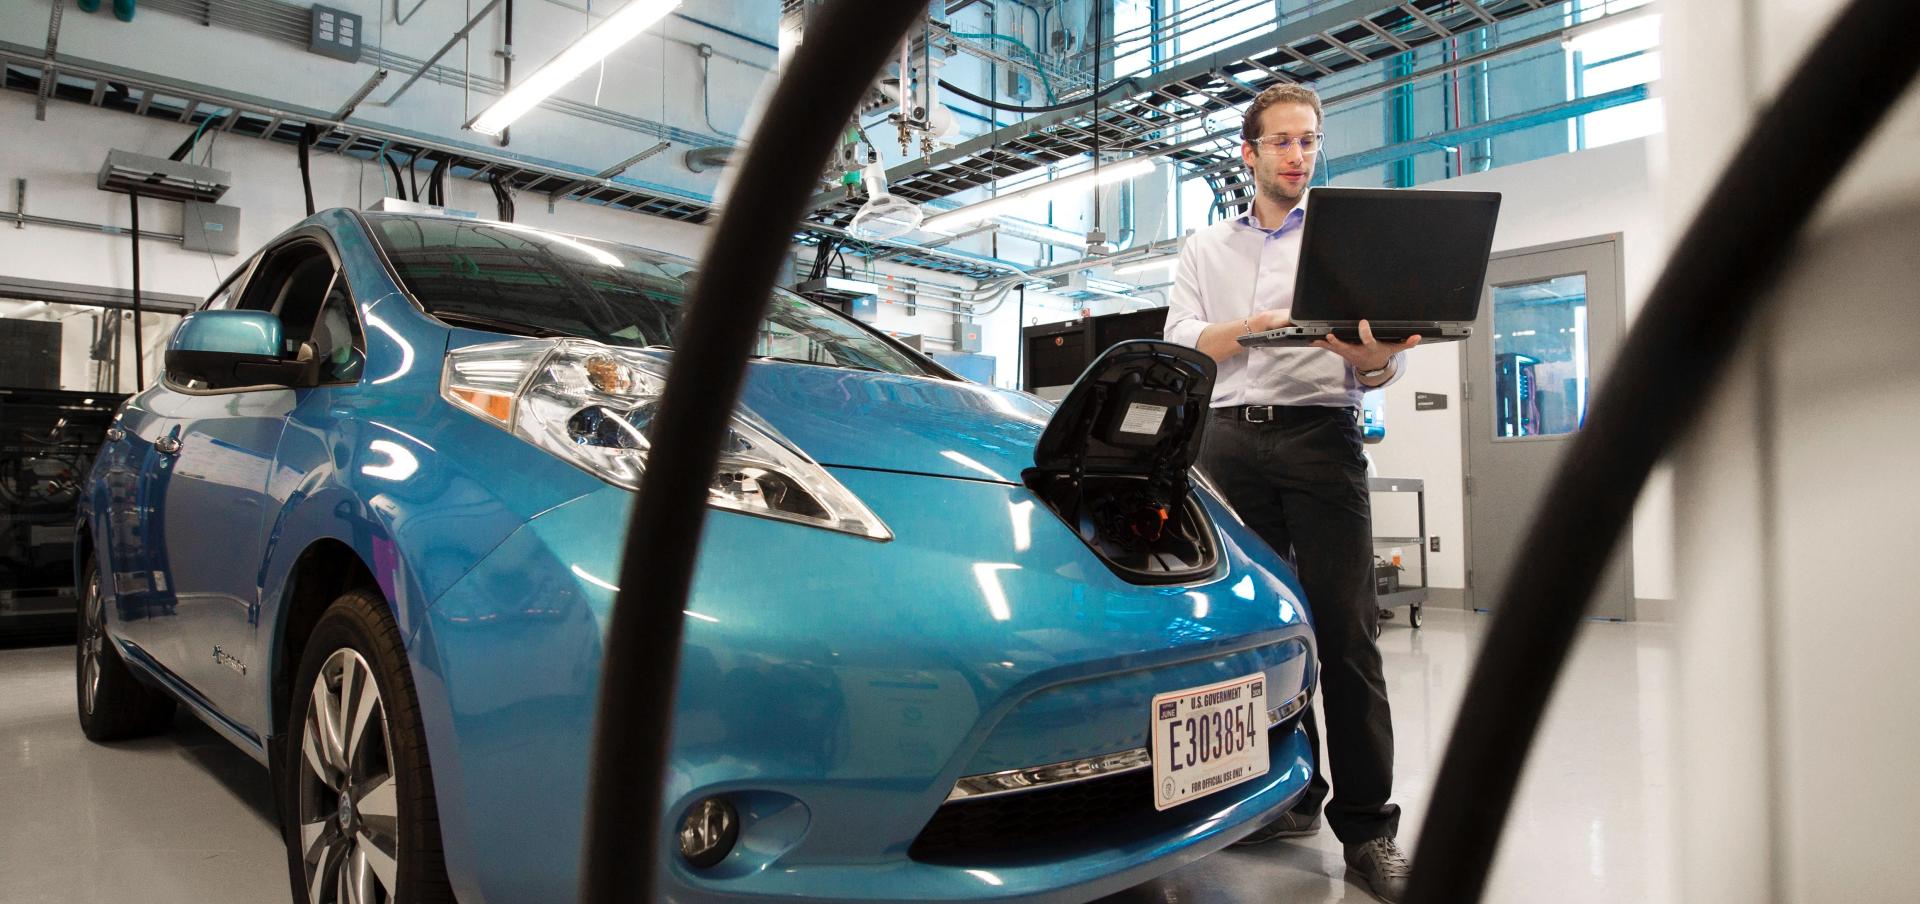 Kettering University students learn about and perform research on electric vehicles.